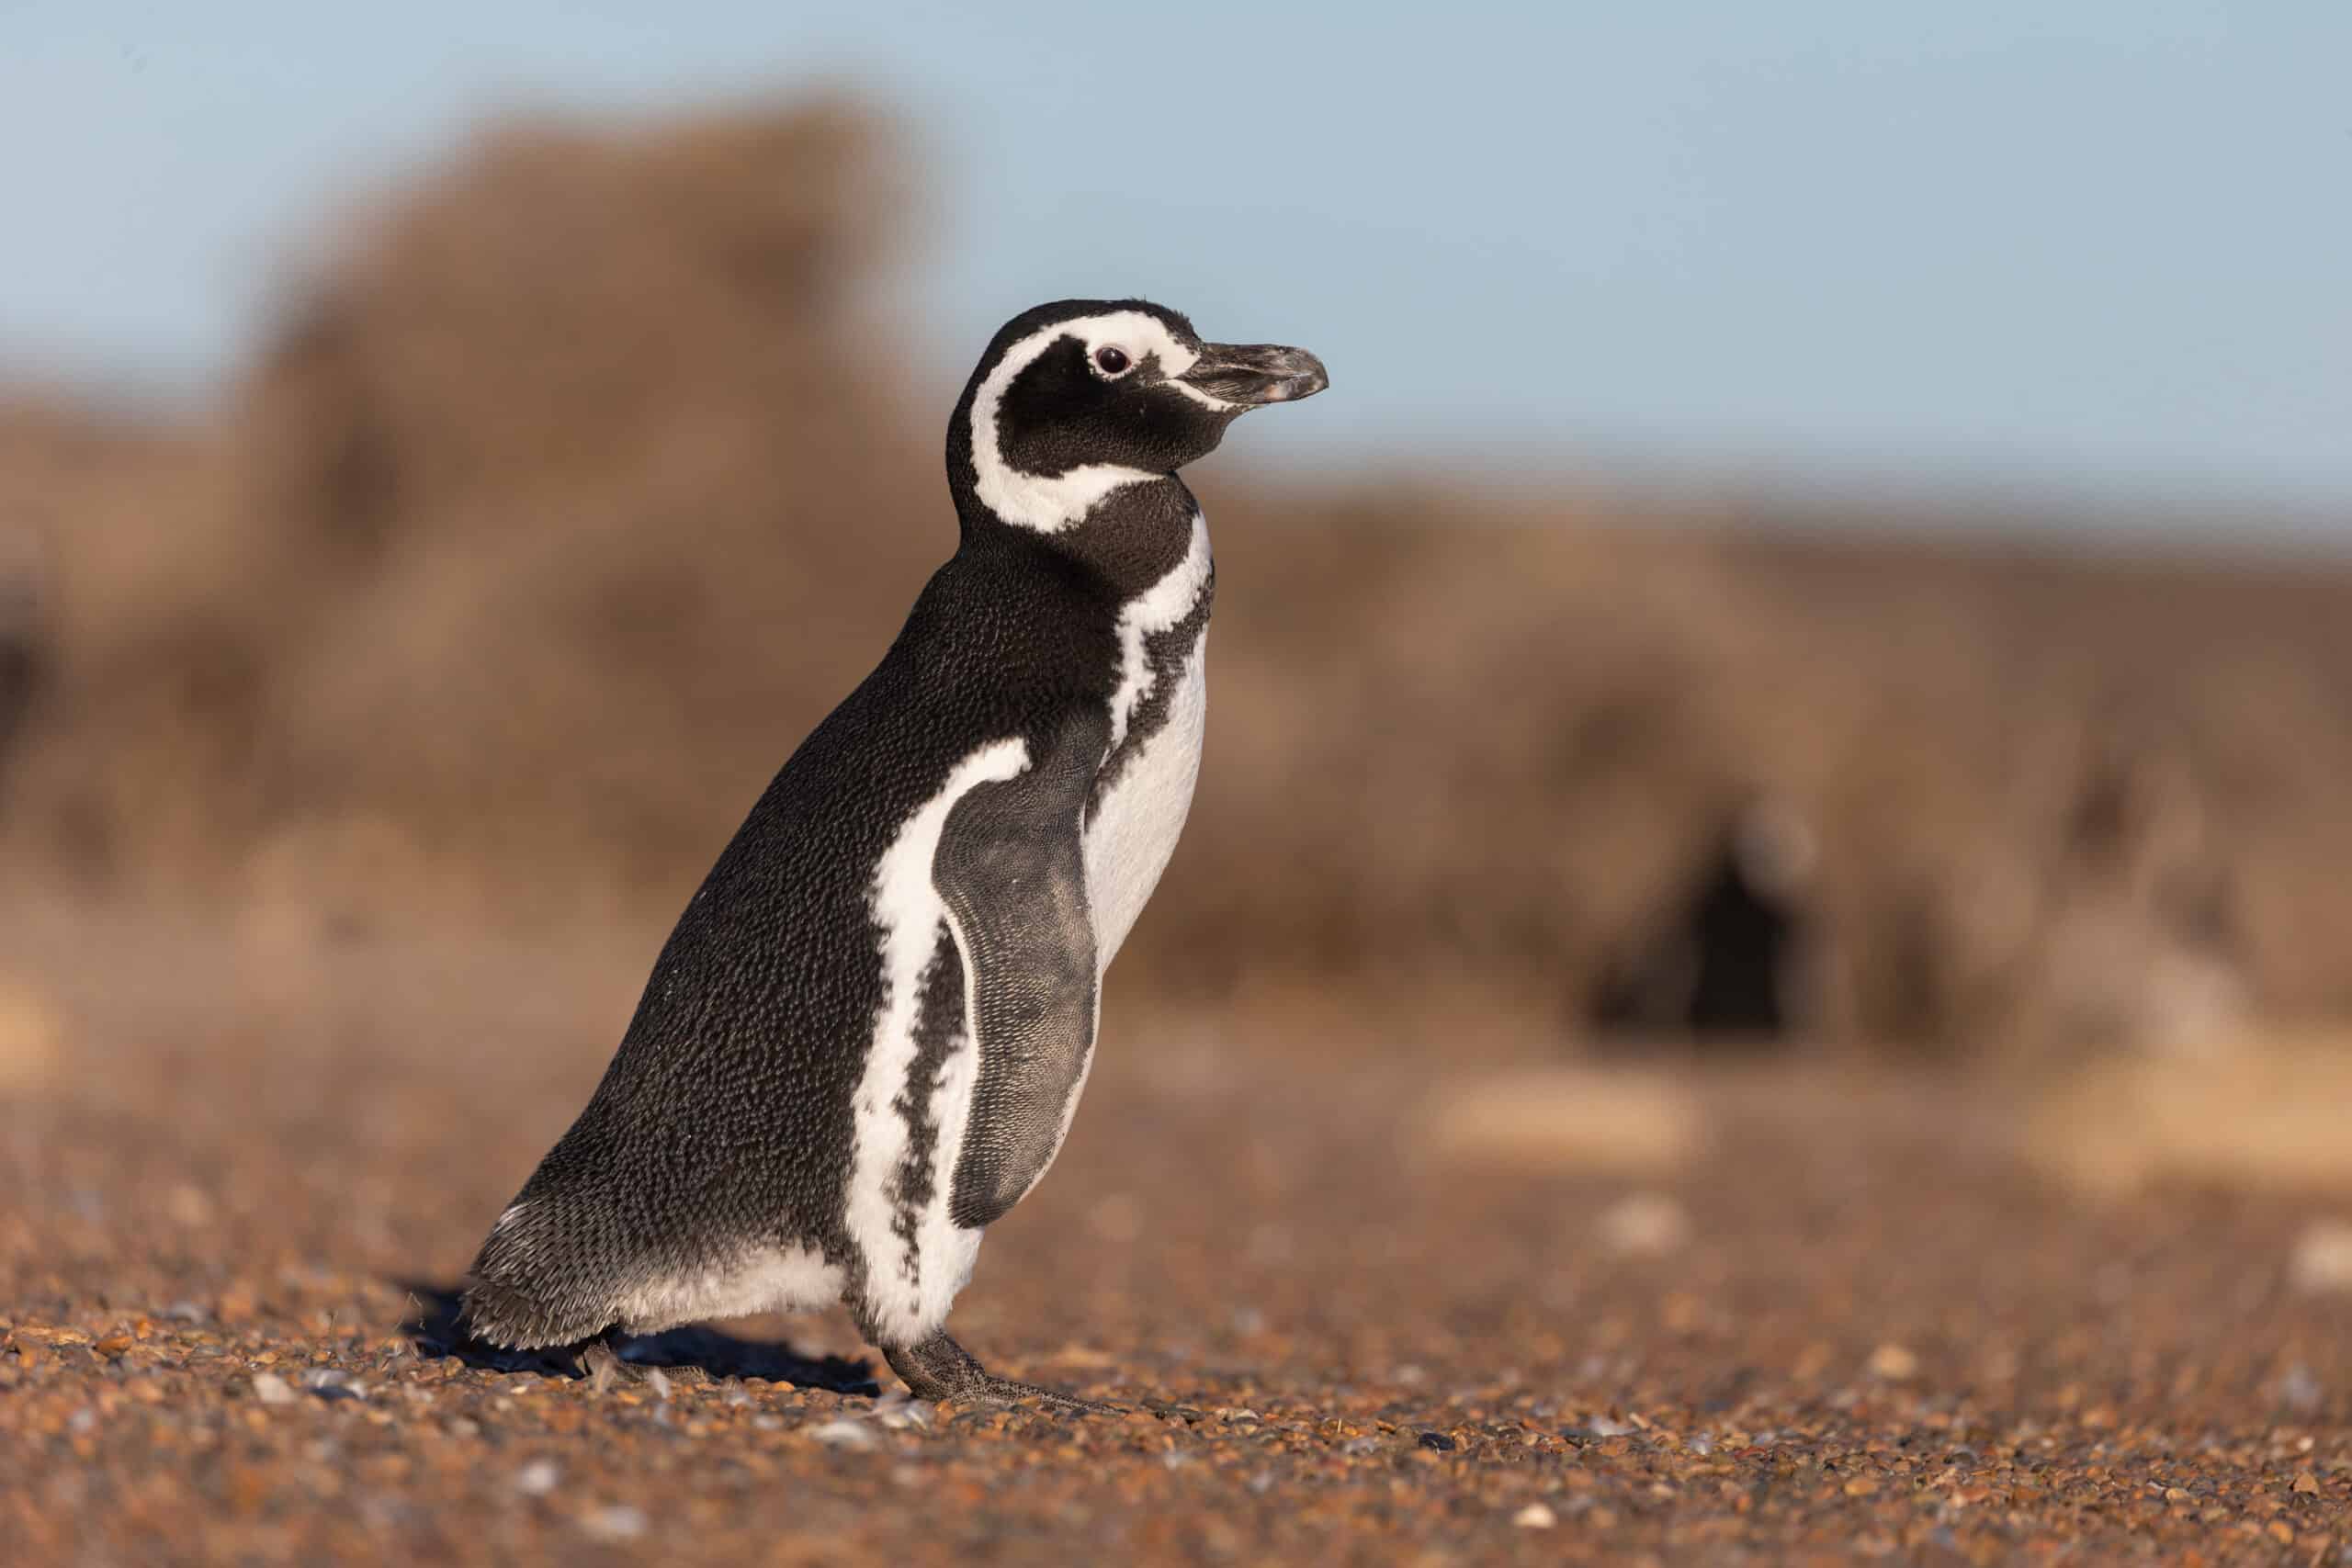 A Safer Home for Patagonia’s Penguins